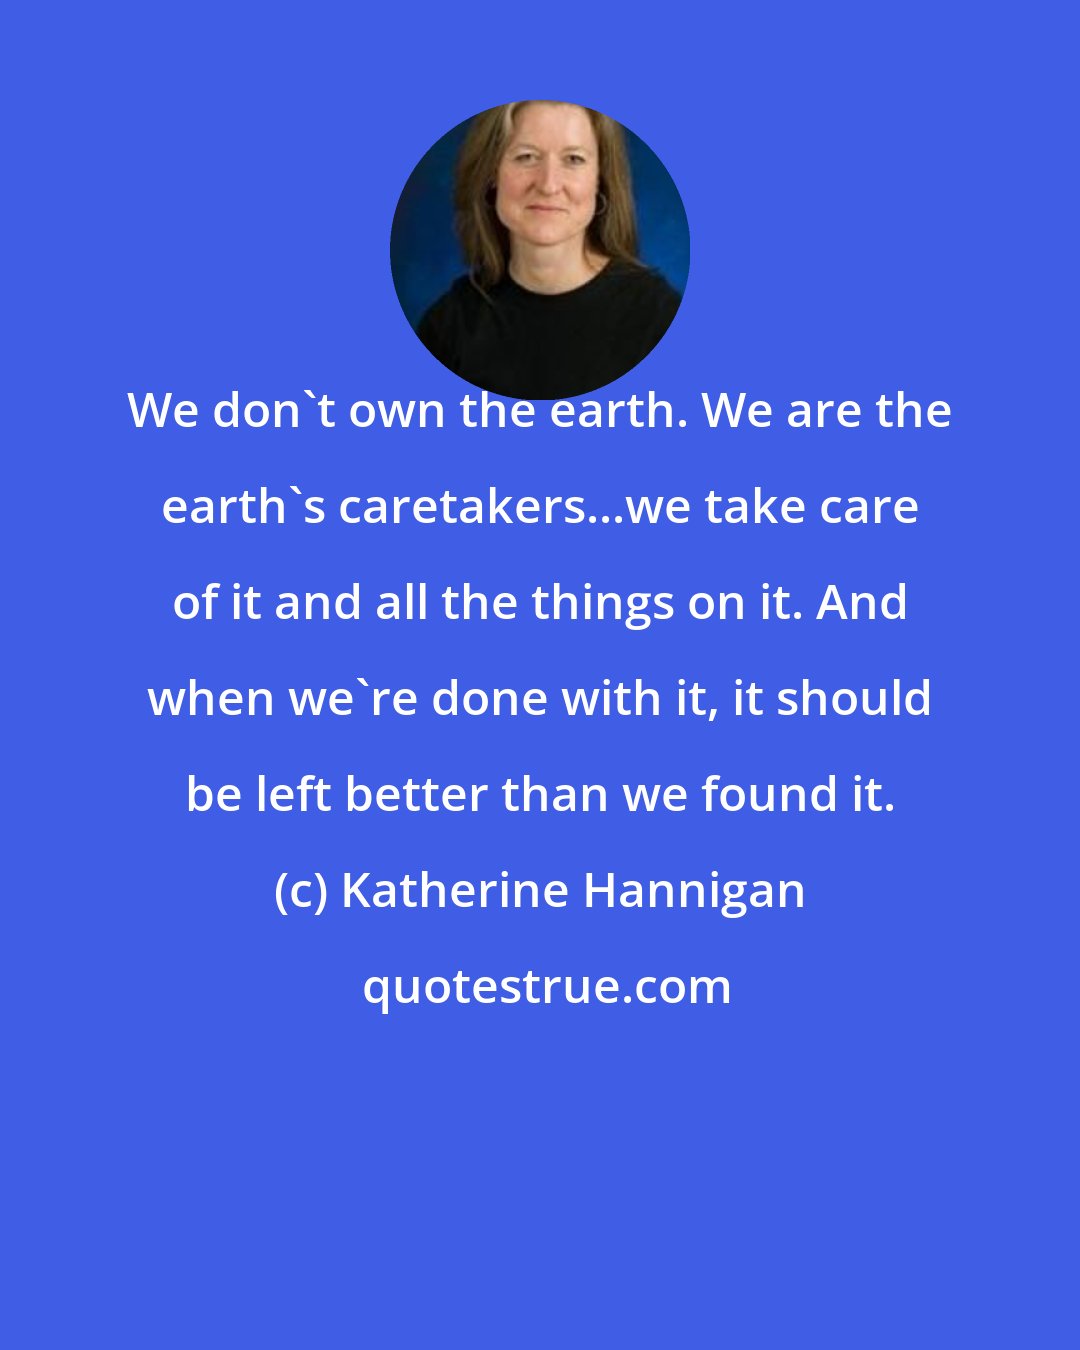 Katherine Hannigan: We don't own the earth. We are the earth's caretakers...we take care of it and all the things on it. And when we're done with it, it should be left better than we found it.